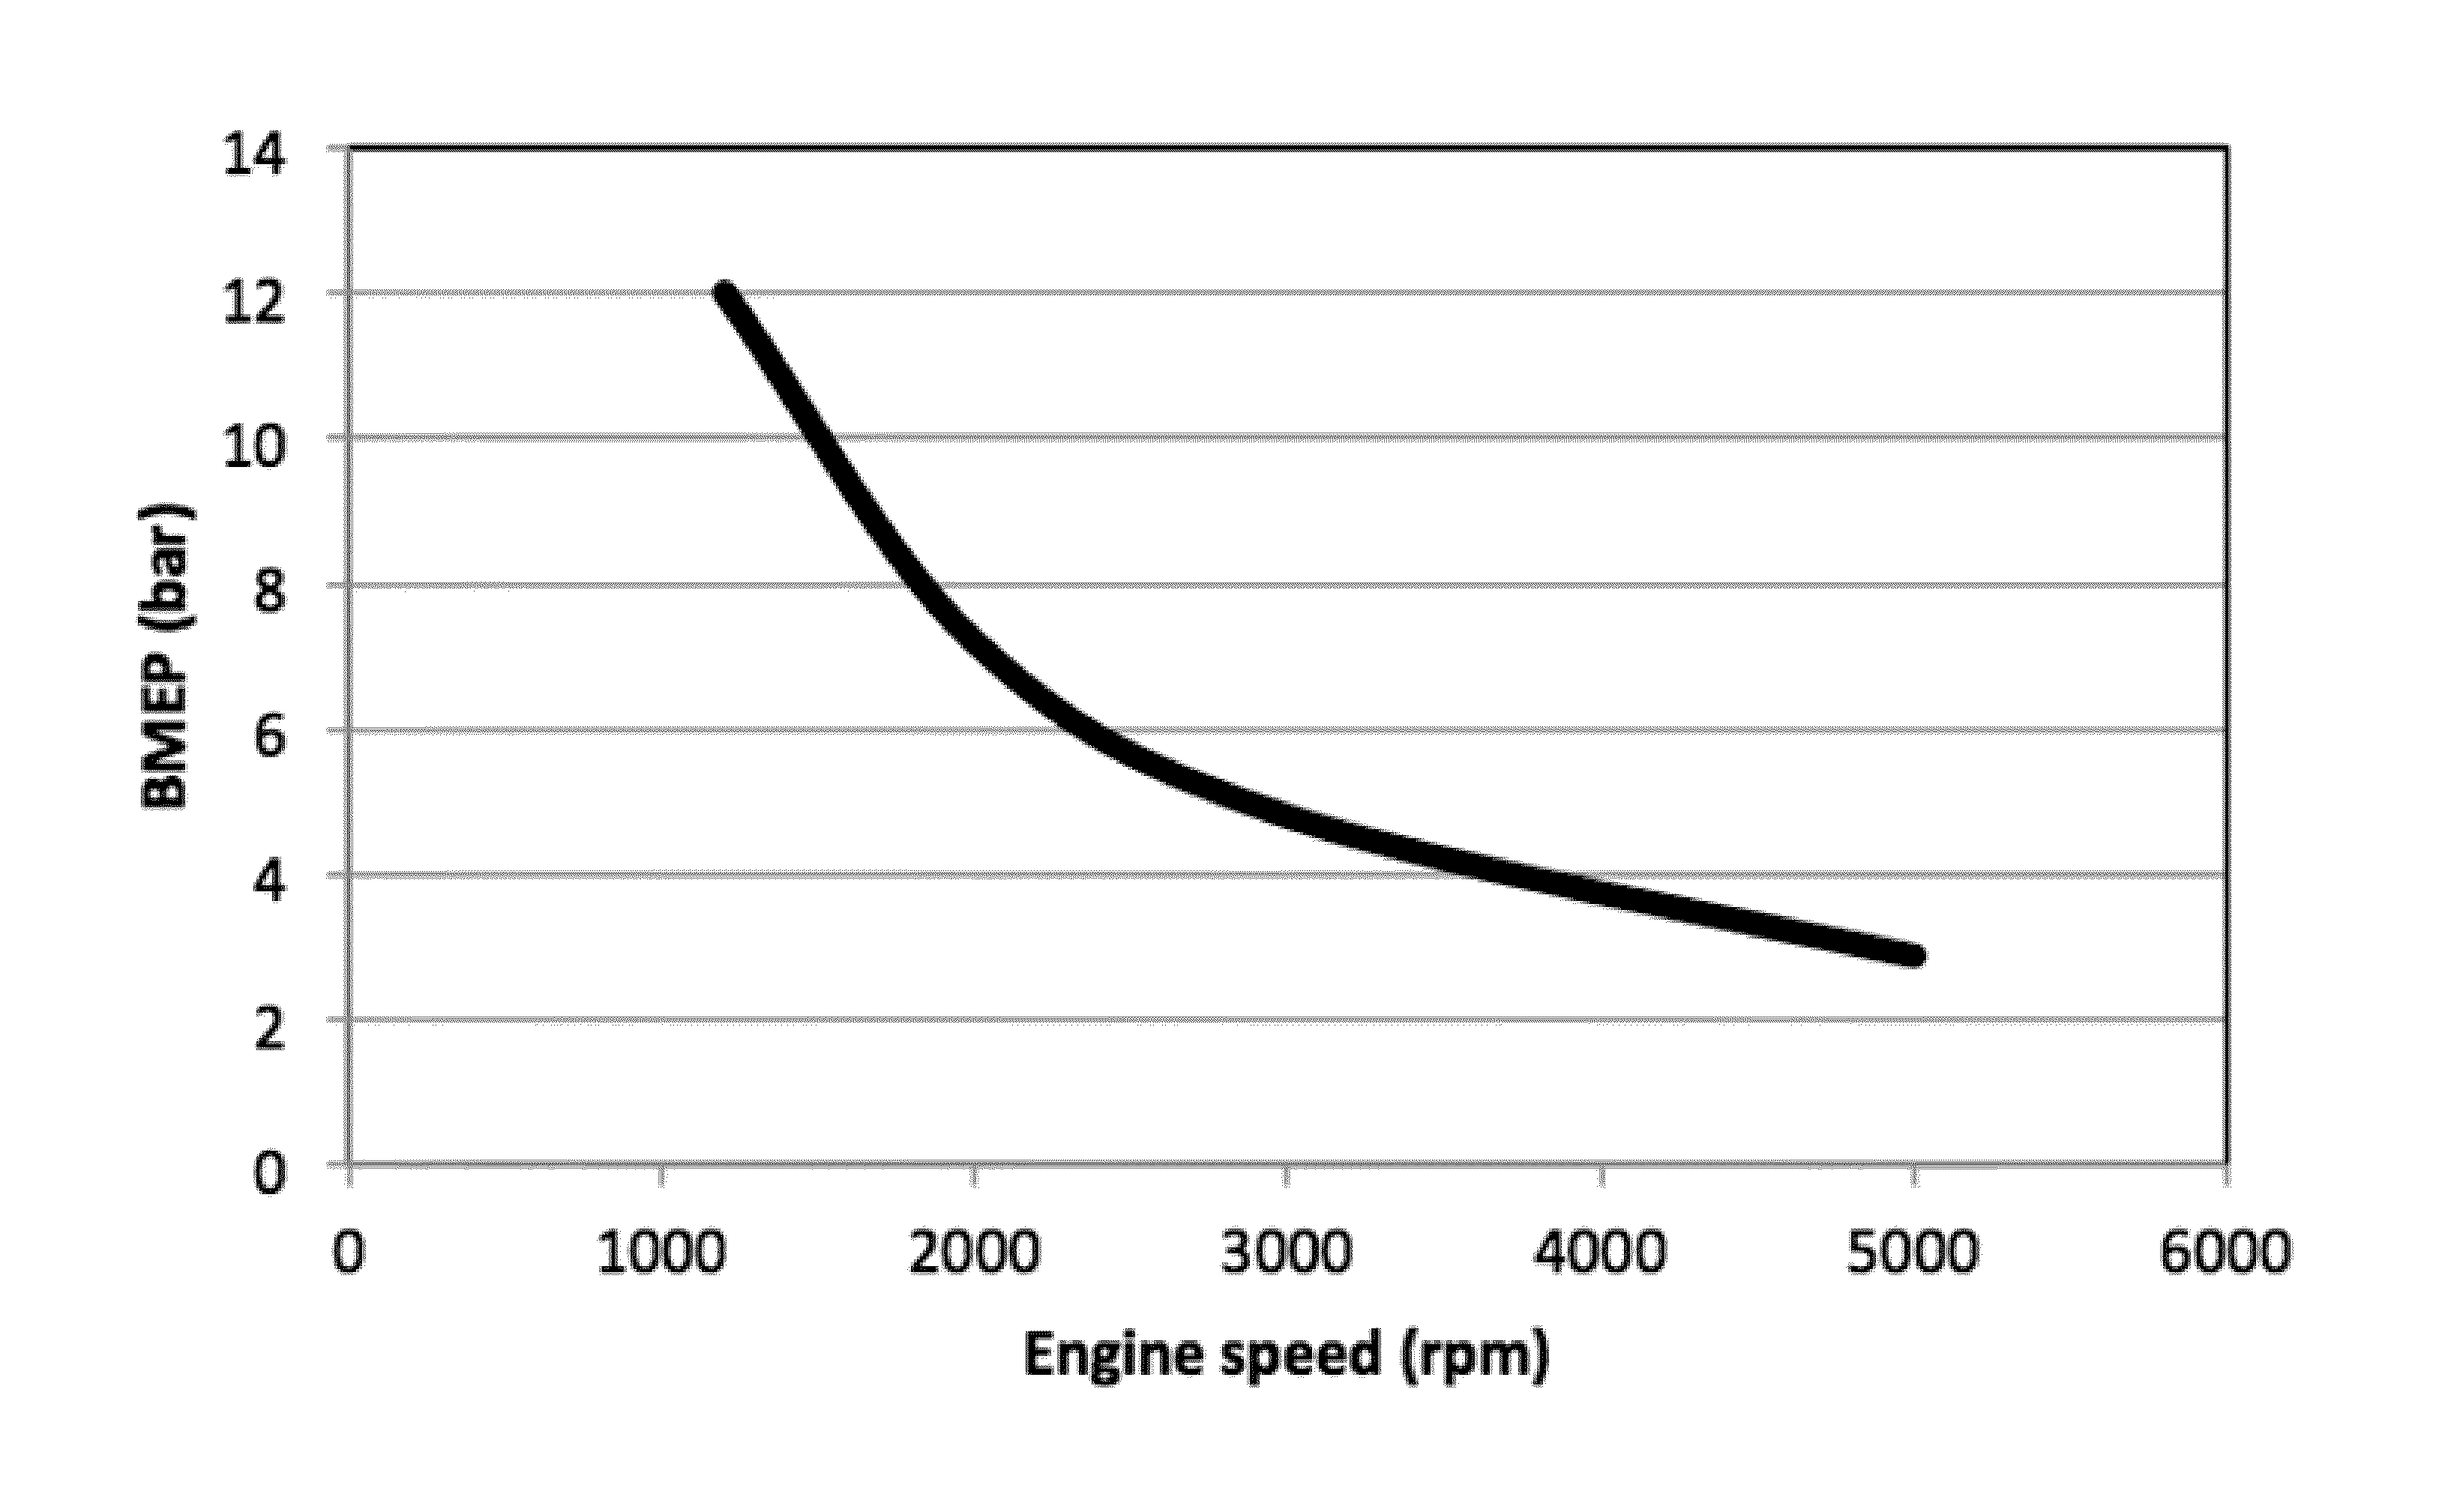 Gasoline Particulate Reduction Using Optimized Port and Direct Injection